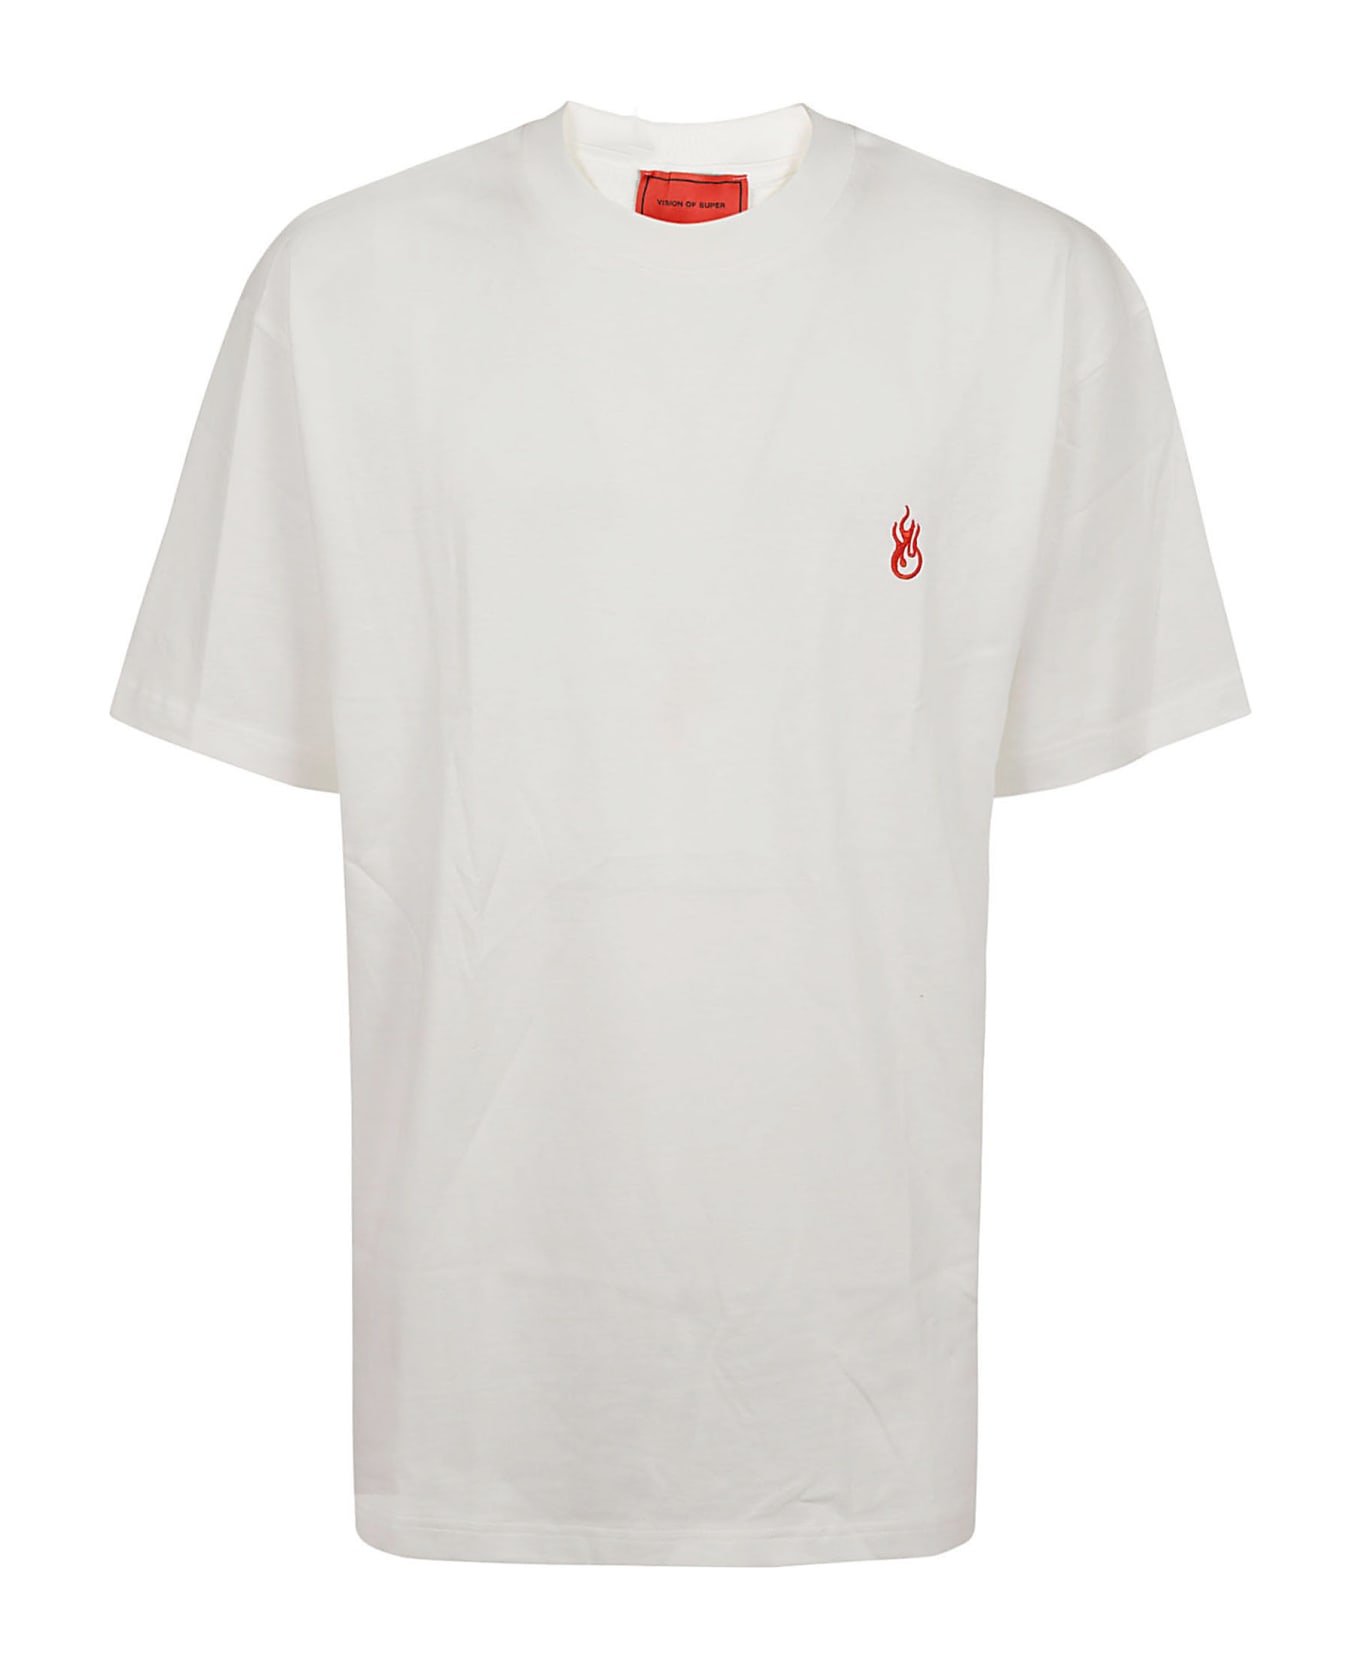 Vision of Super White T-shirt With Flames Logo And Metal Label - White